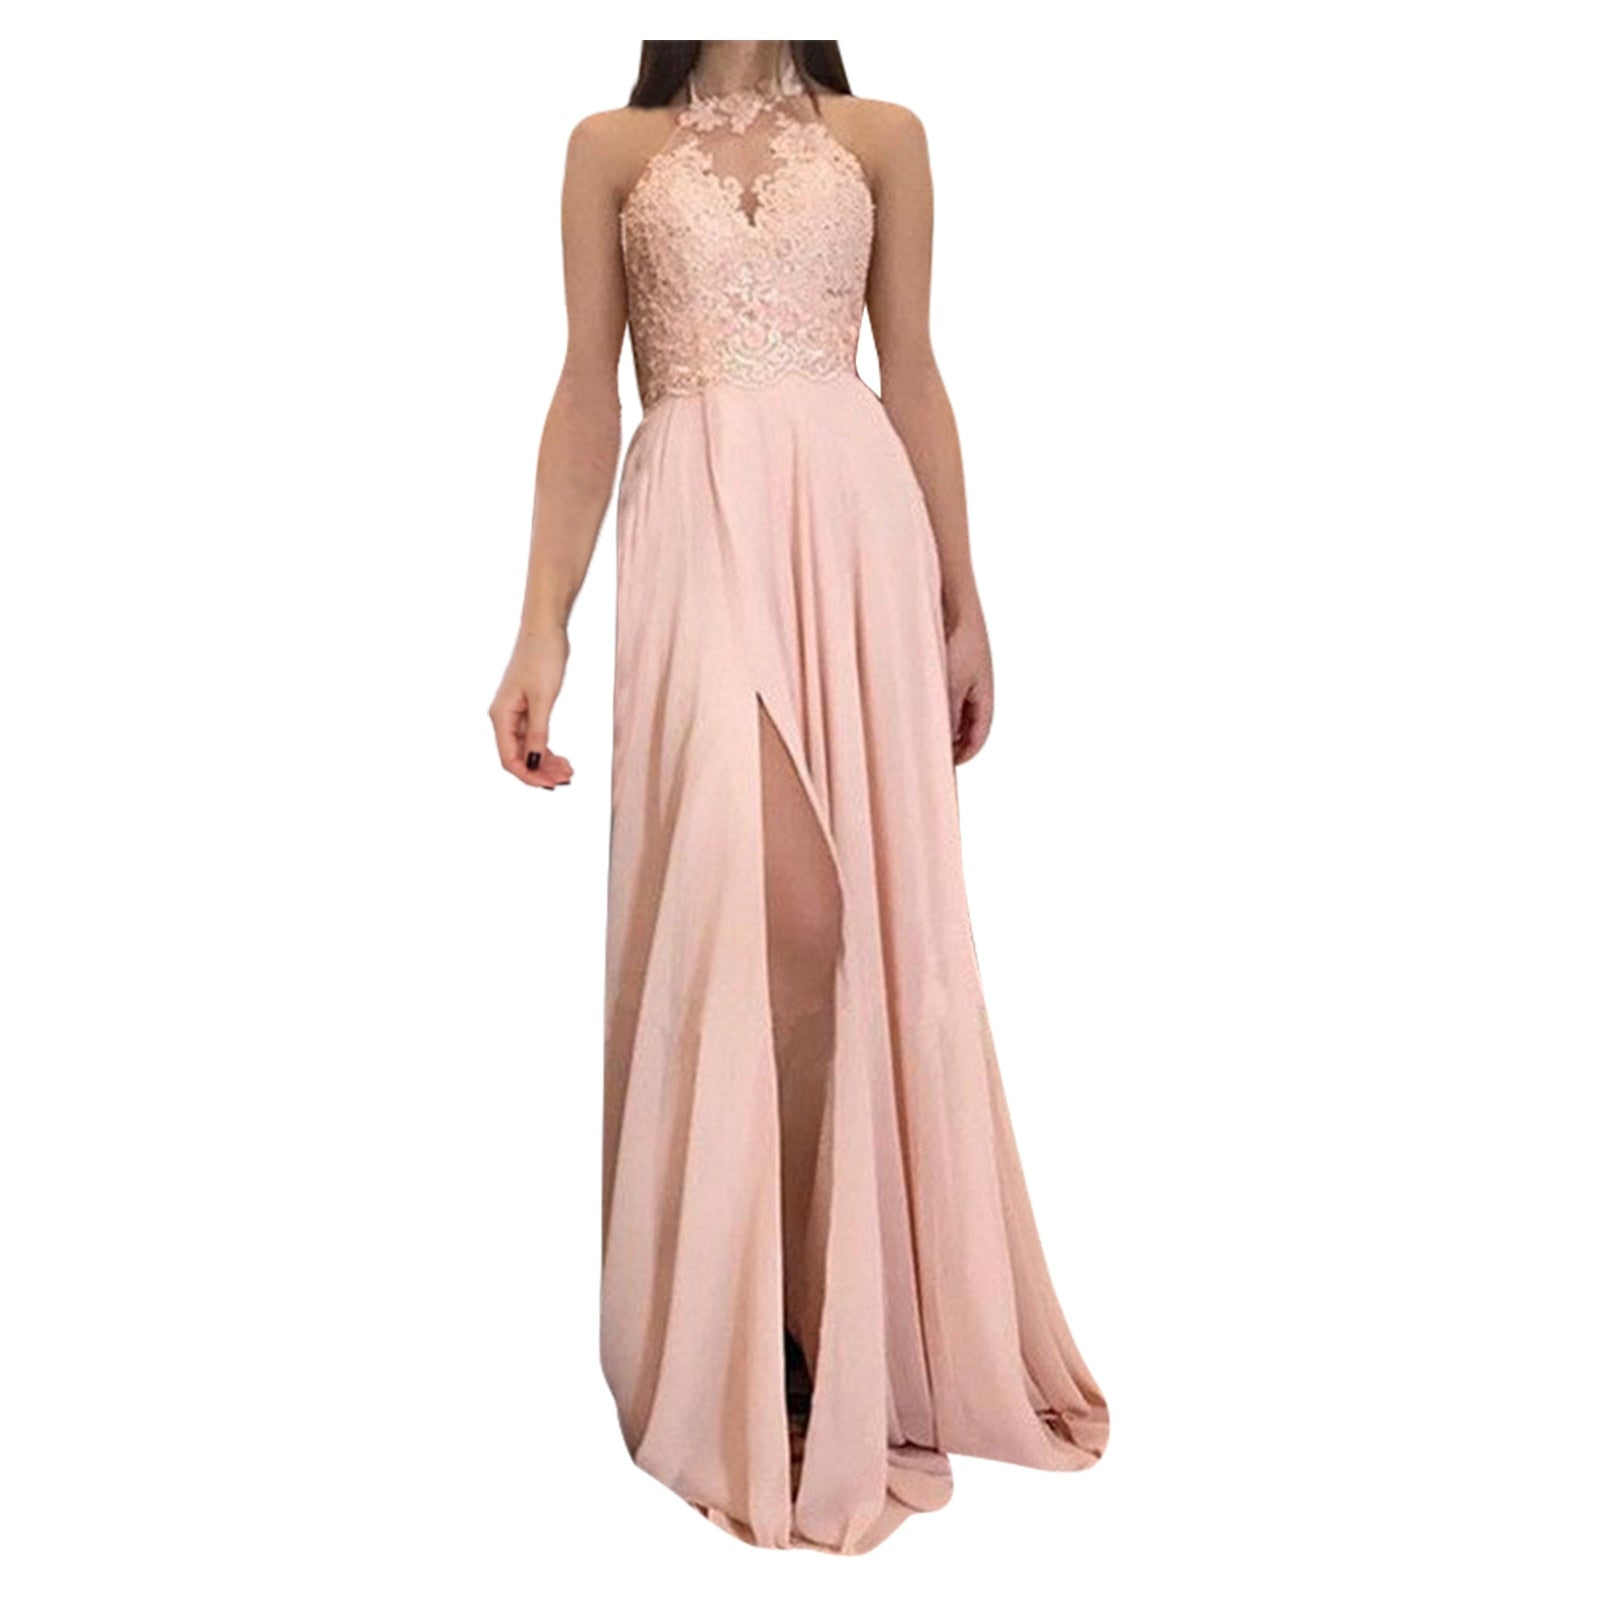 HOOR Elegant Sexy Lace Gown Pink